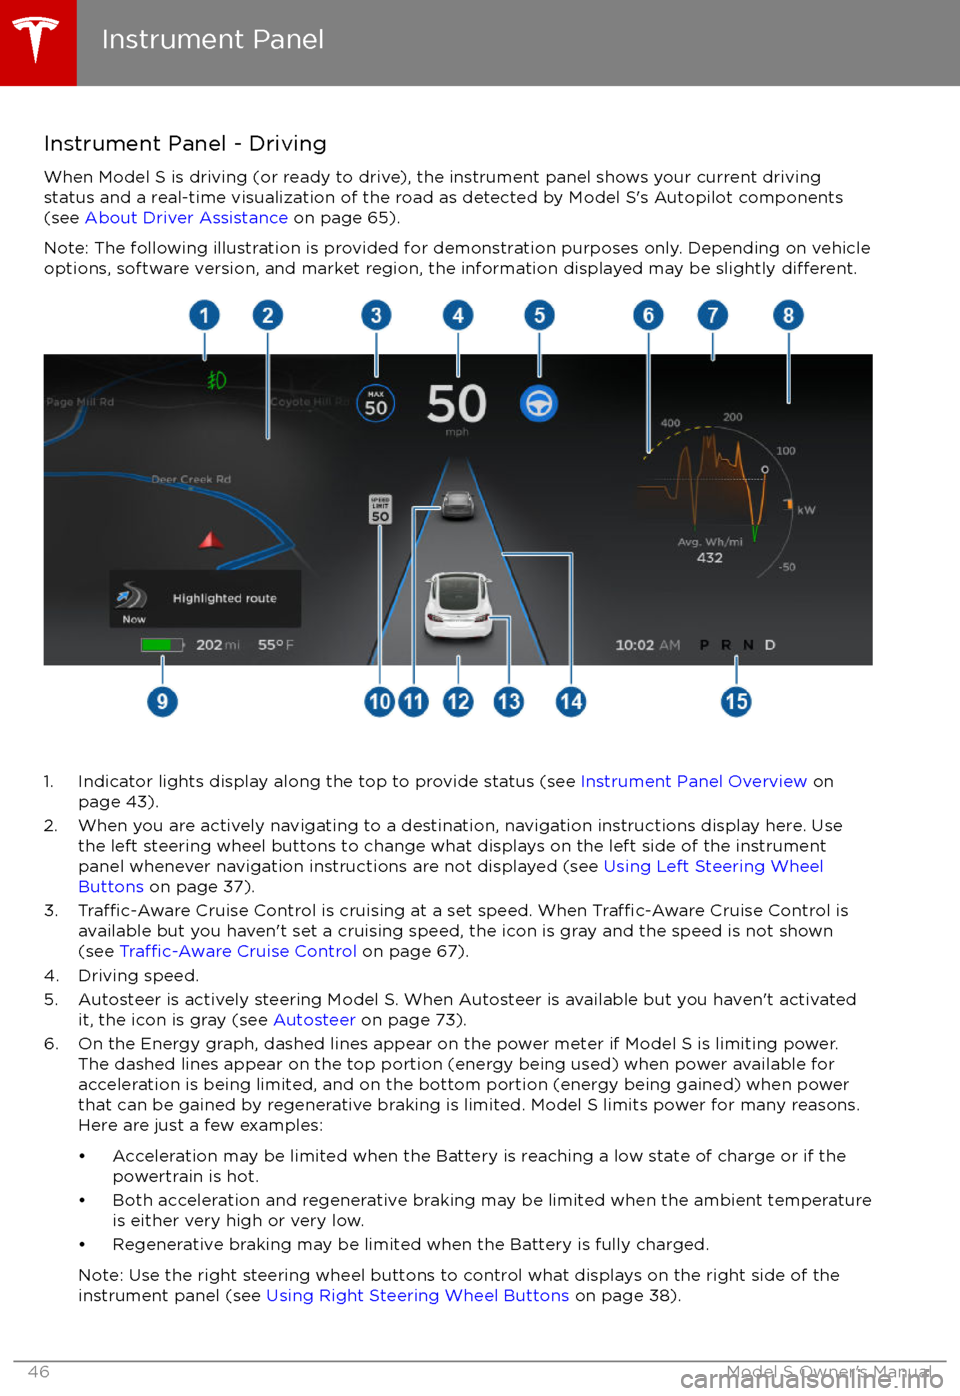 TESLA MODEL S 2017 Service Manual Instrument Panel - DrivingWhen Model S is driving (or ready to drive), the instrument panel shows your current drivingstatus and a real-time visualization of the road as detected by Model S